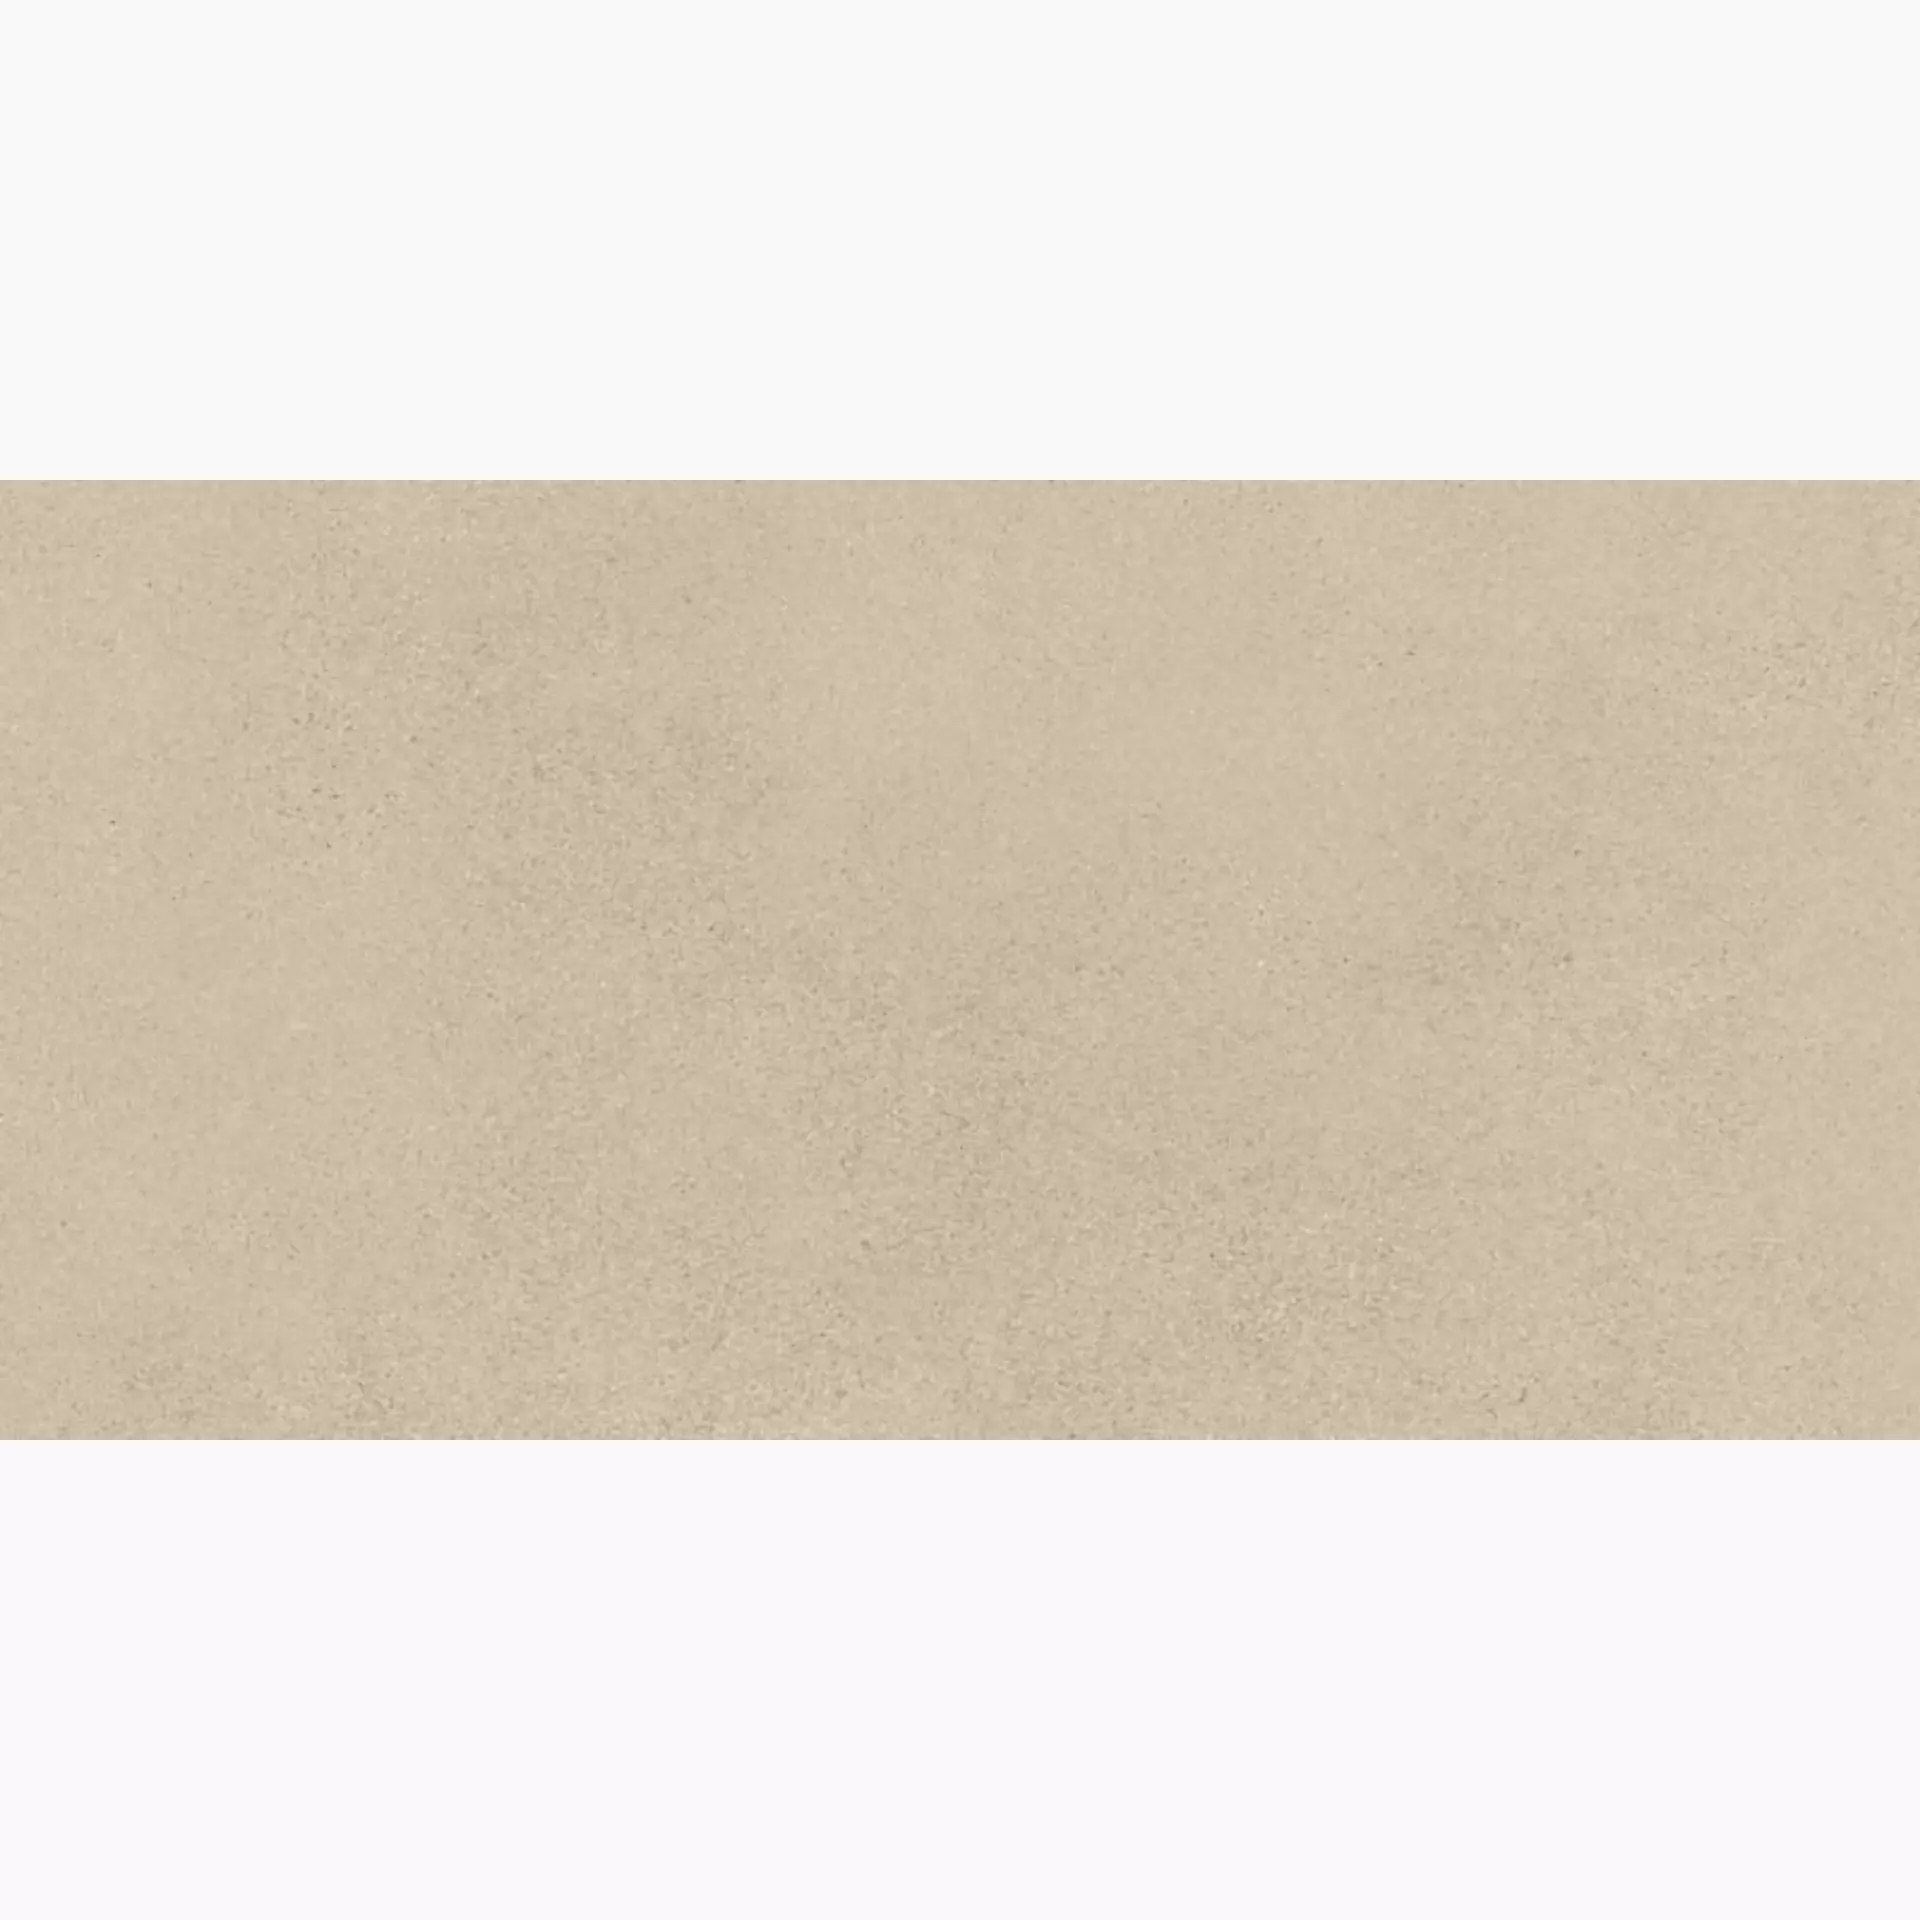 Sant Agostino Sable Beige Natural CSASABBE30 30x60cm rectified 10mm